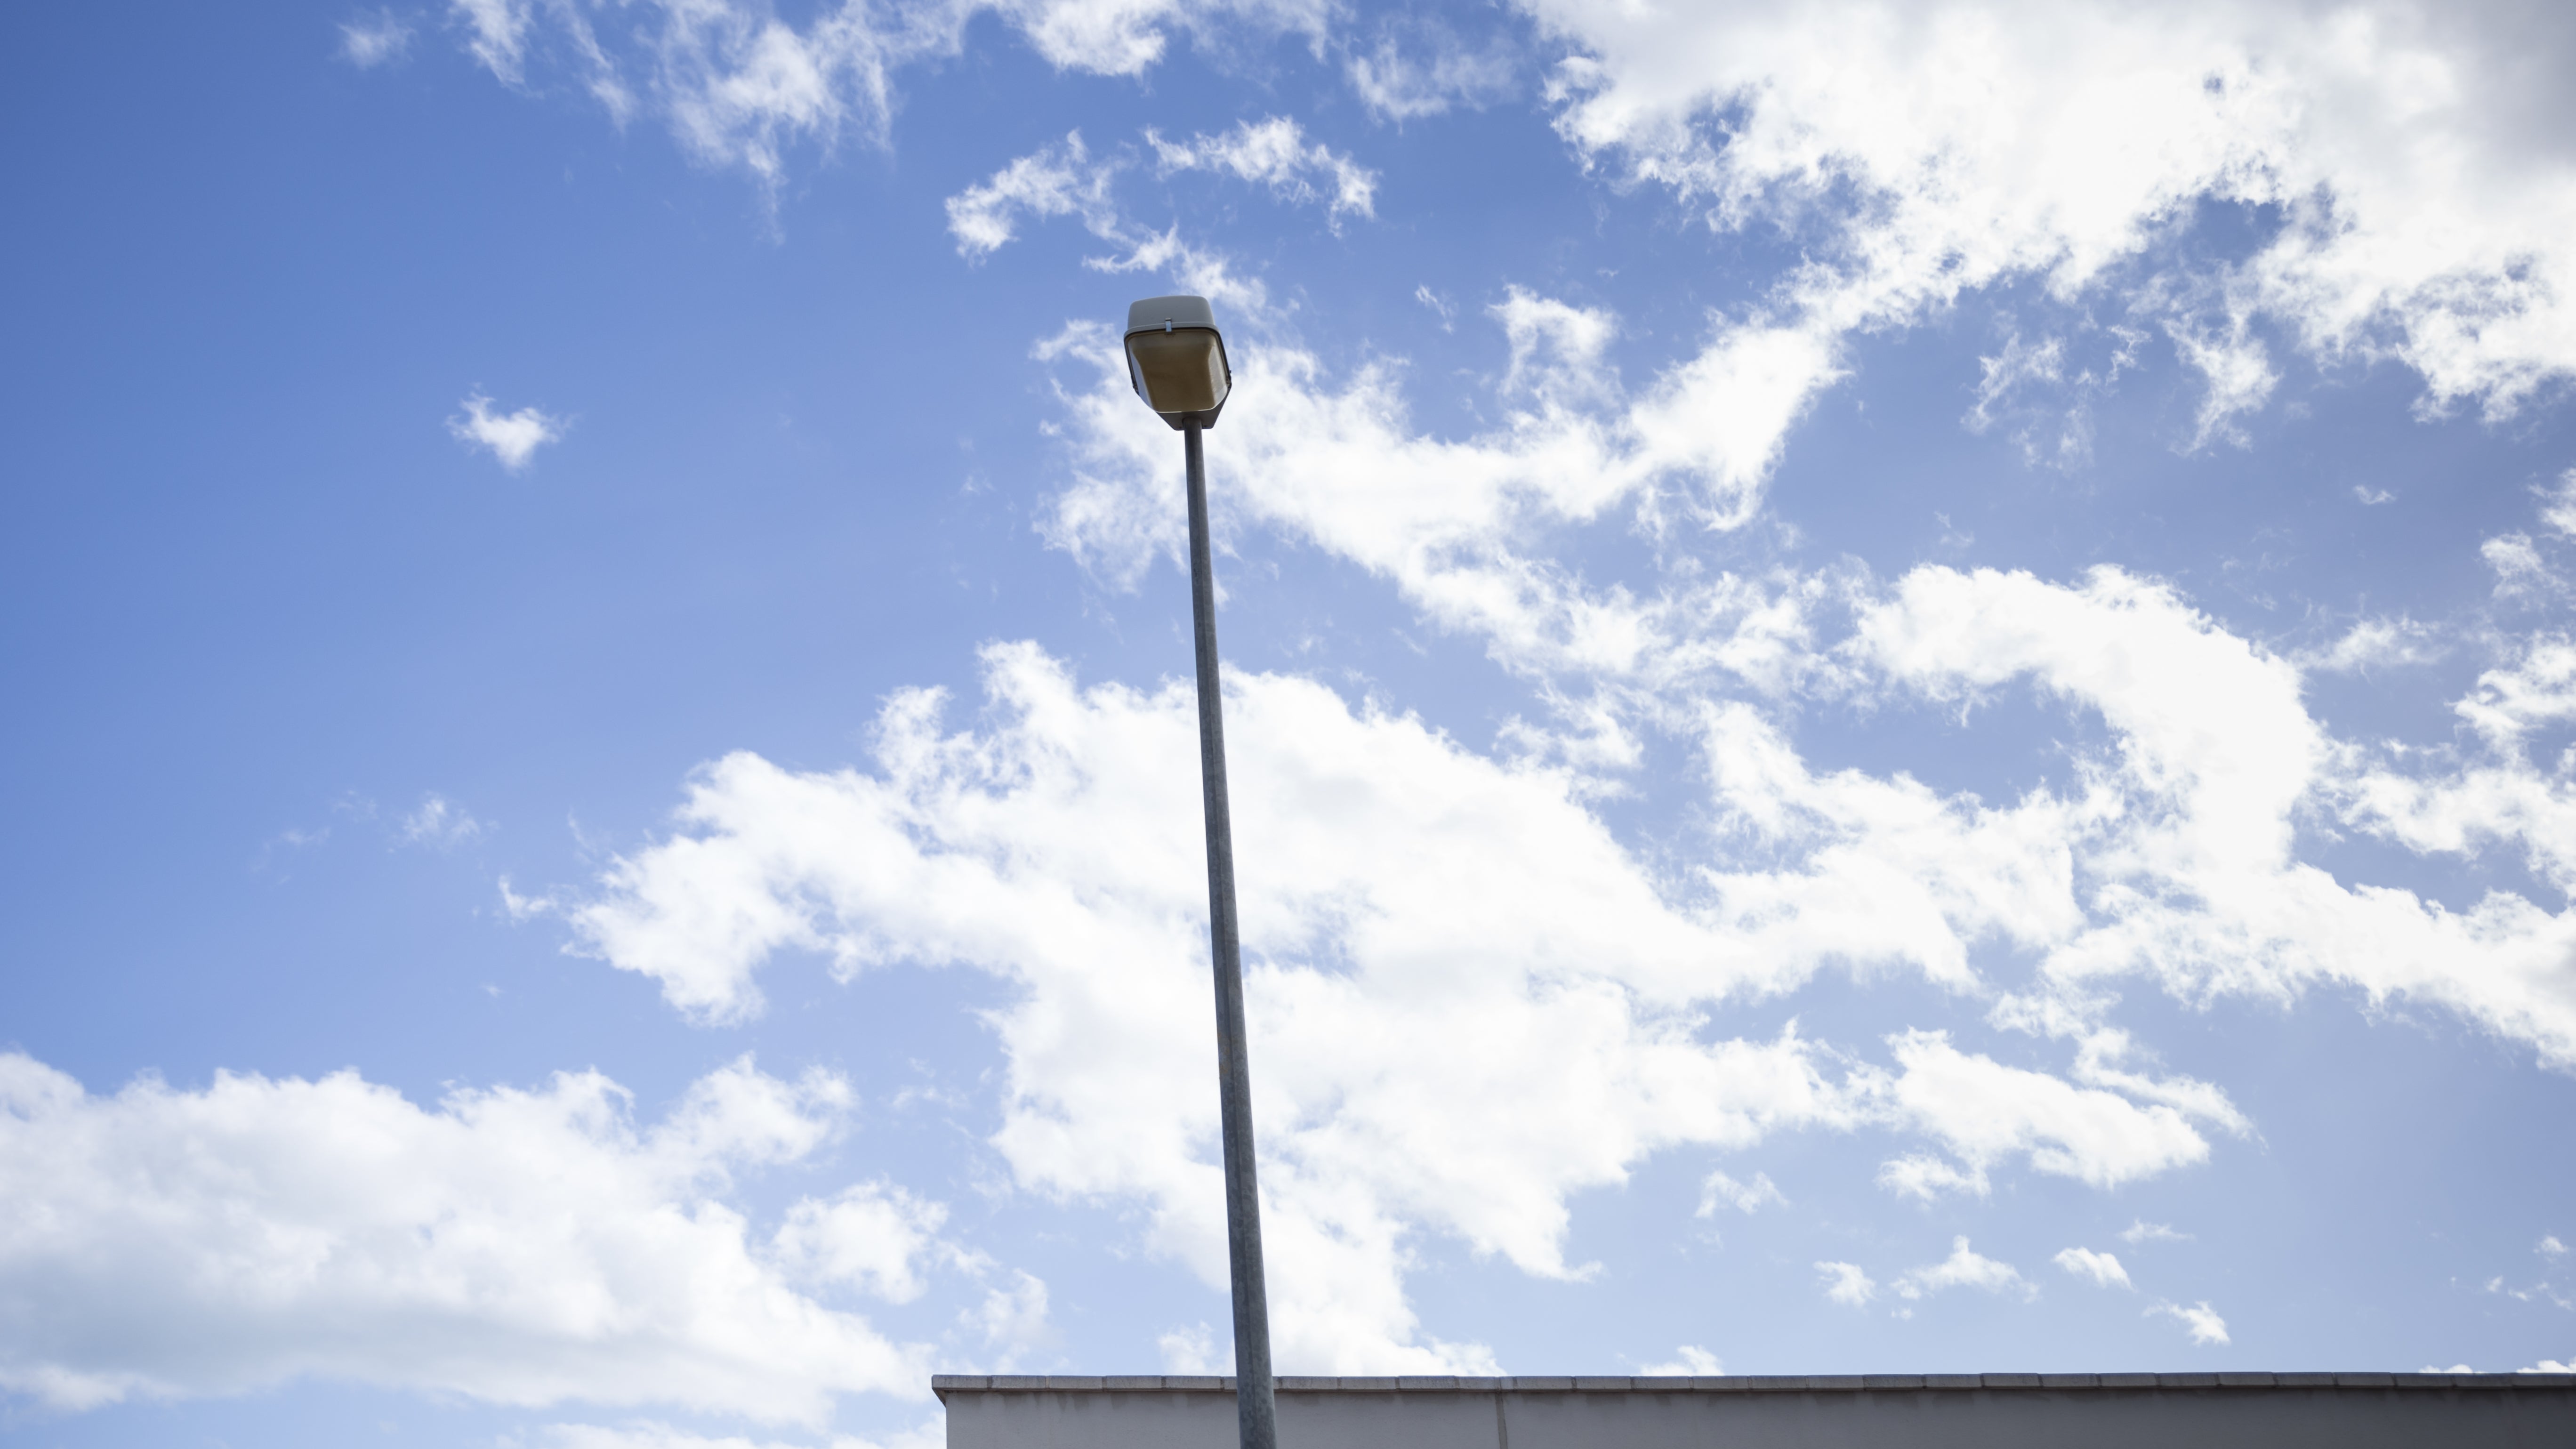 How To Repair The Street Light Pole After It Is Destroyed